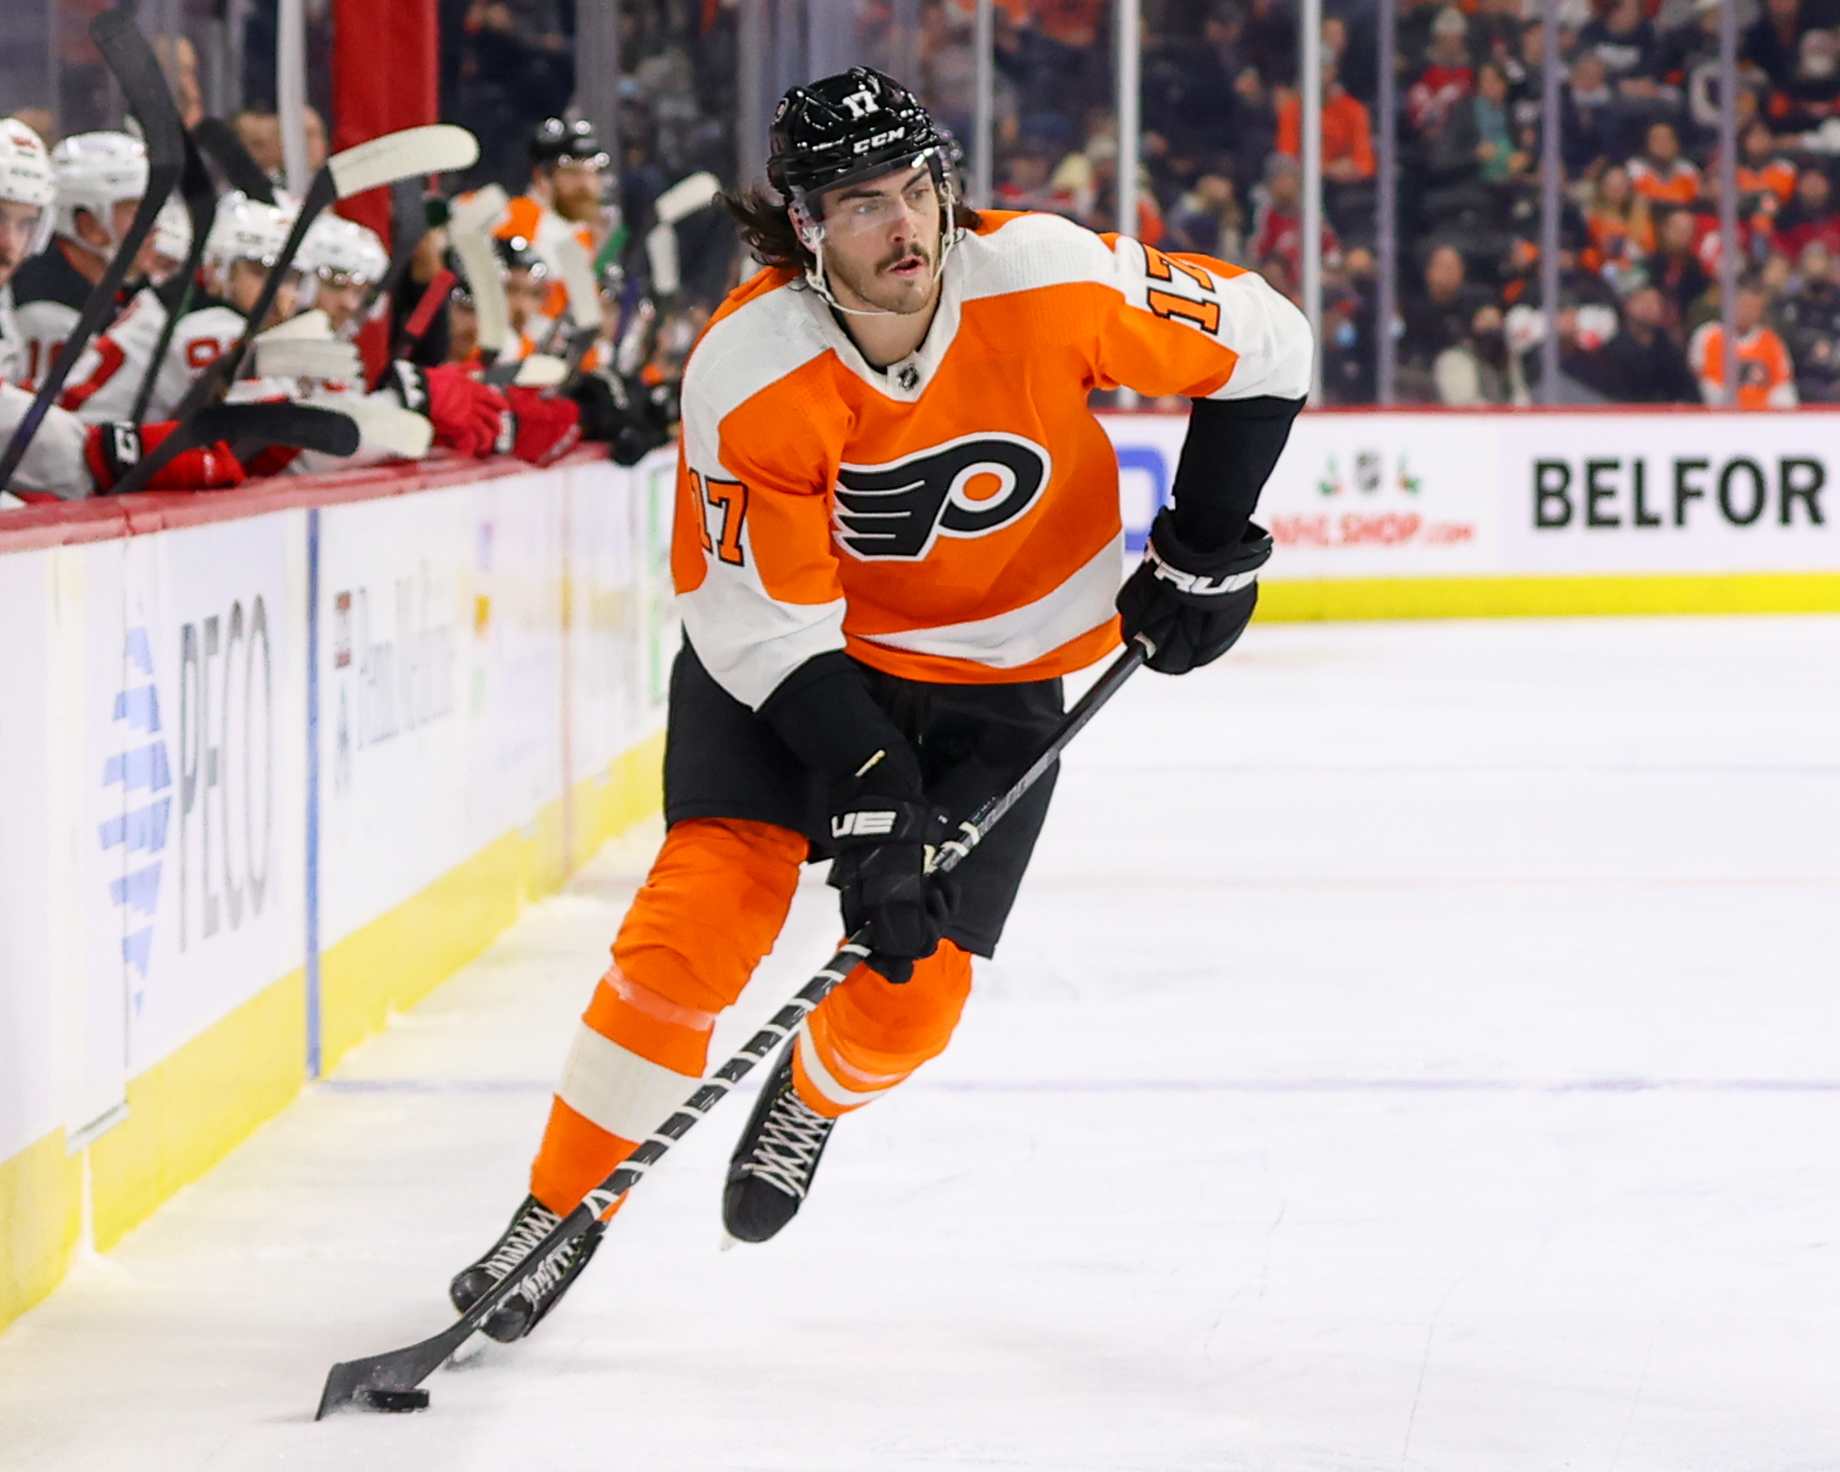 Zack MacEwen is fueled by good work ethic, and he is now a goal scorer  (Flyers) – FLYERS NITTY GRITTY